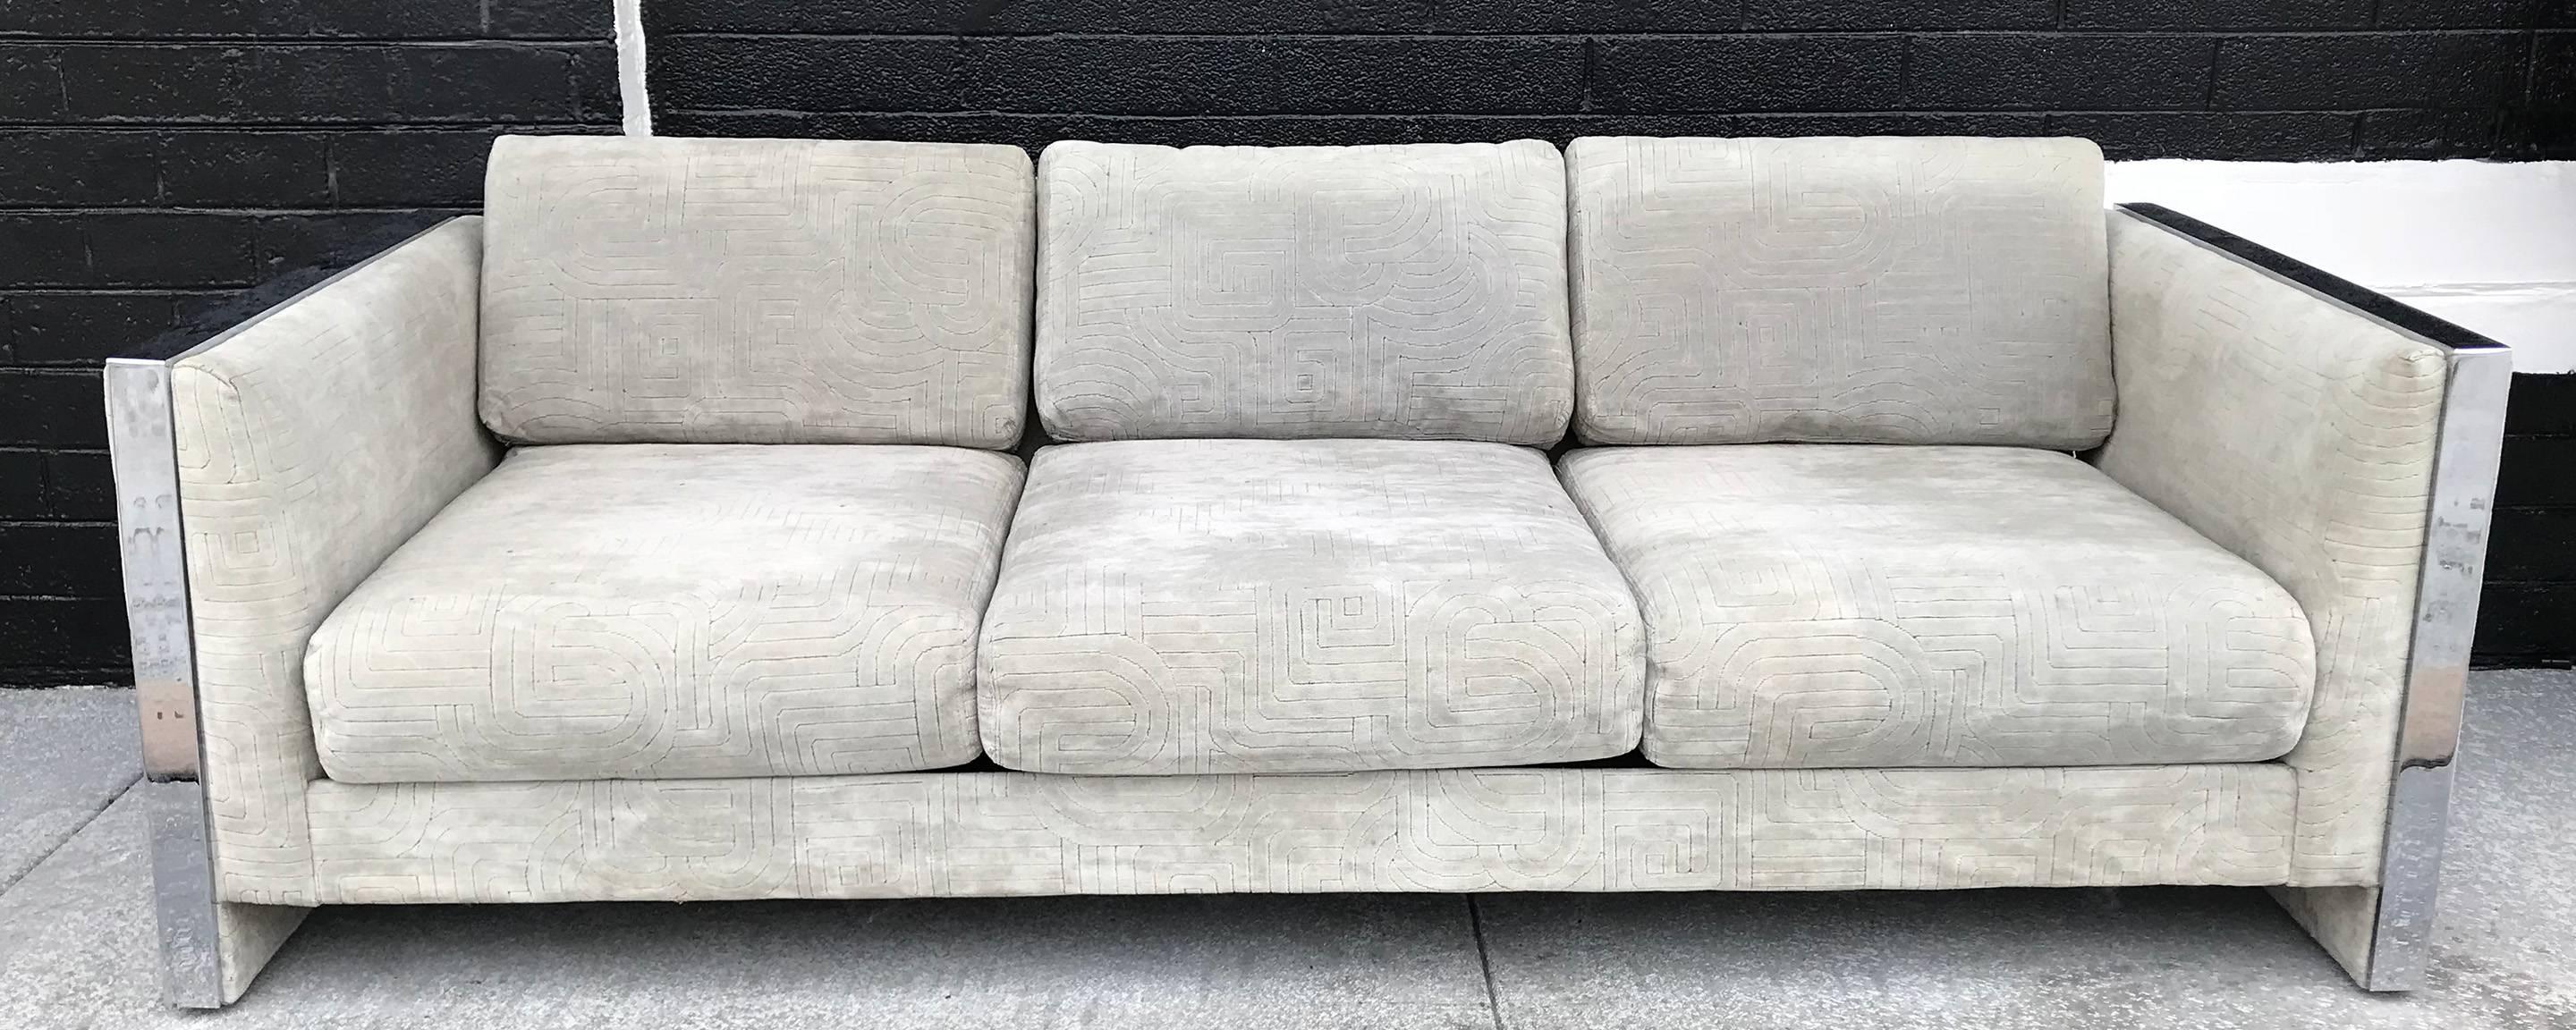 A gorgeous sofa by Selig Monroe. This 1970s sofa features chrome accented sides, and a bold tone on tone geometric patterned light grey velvet upholstery. Very Milo Baughman in style!